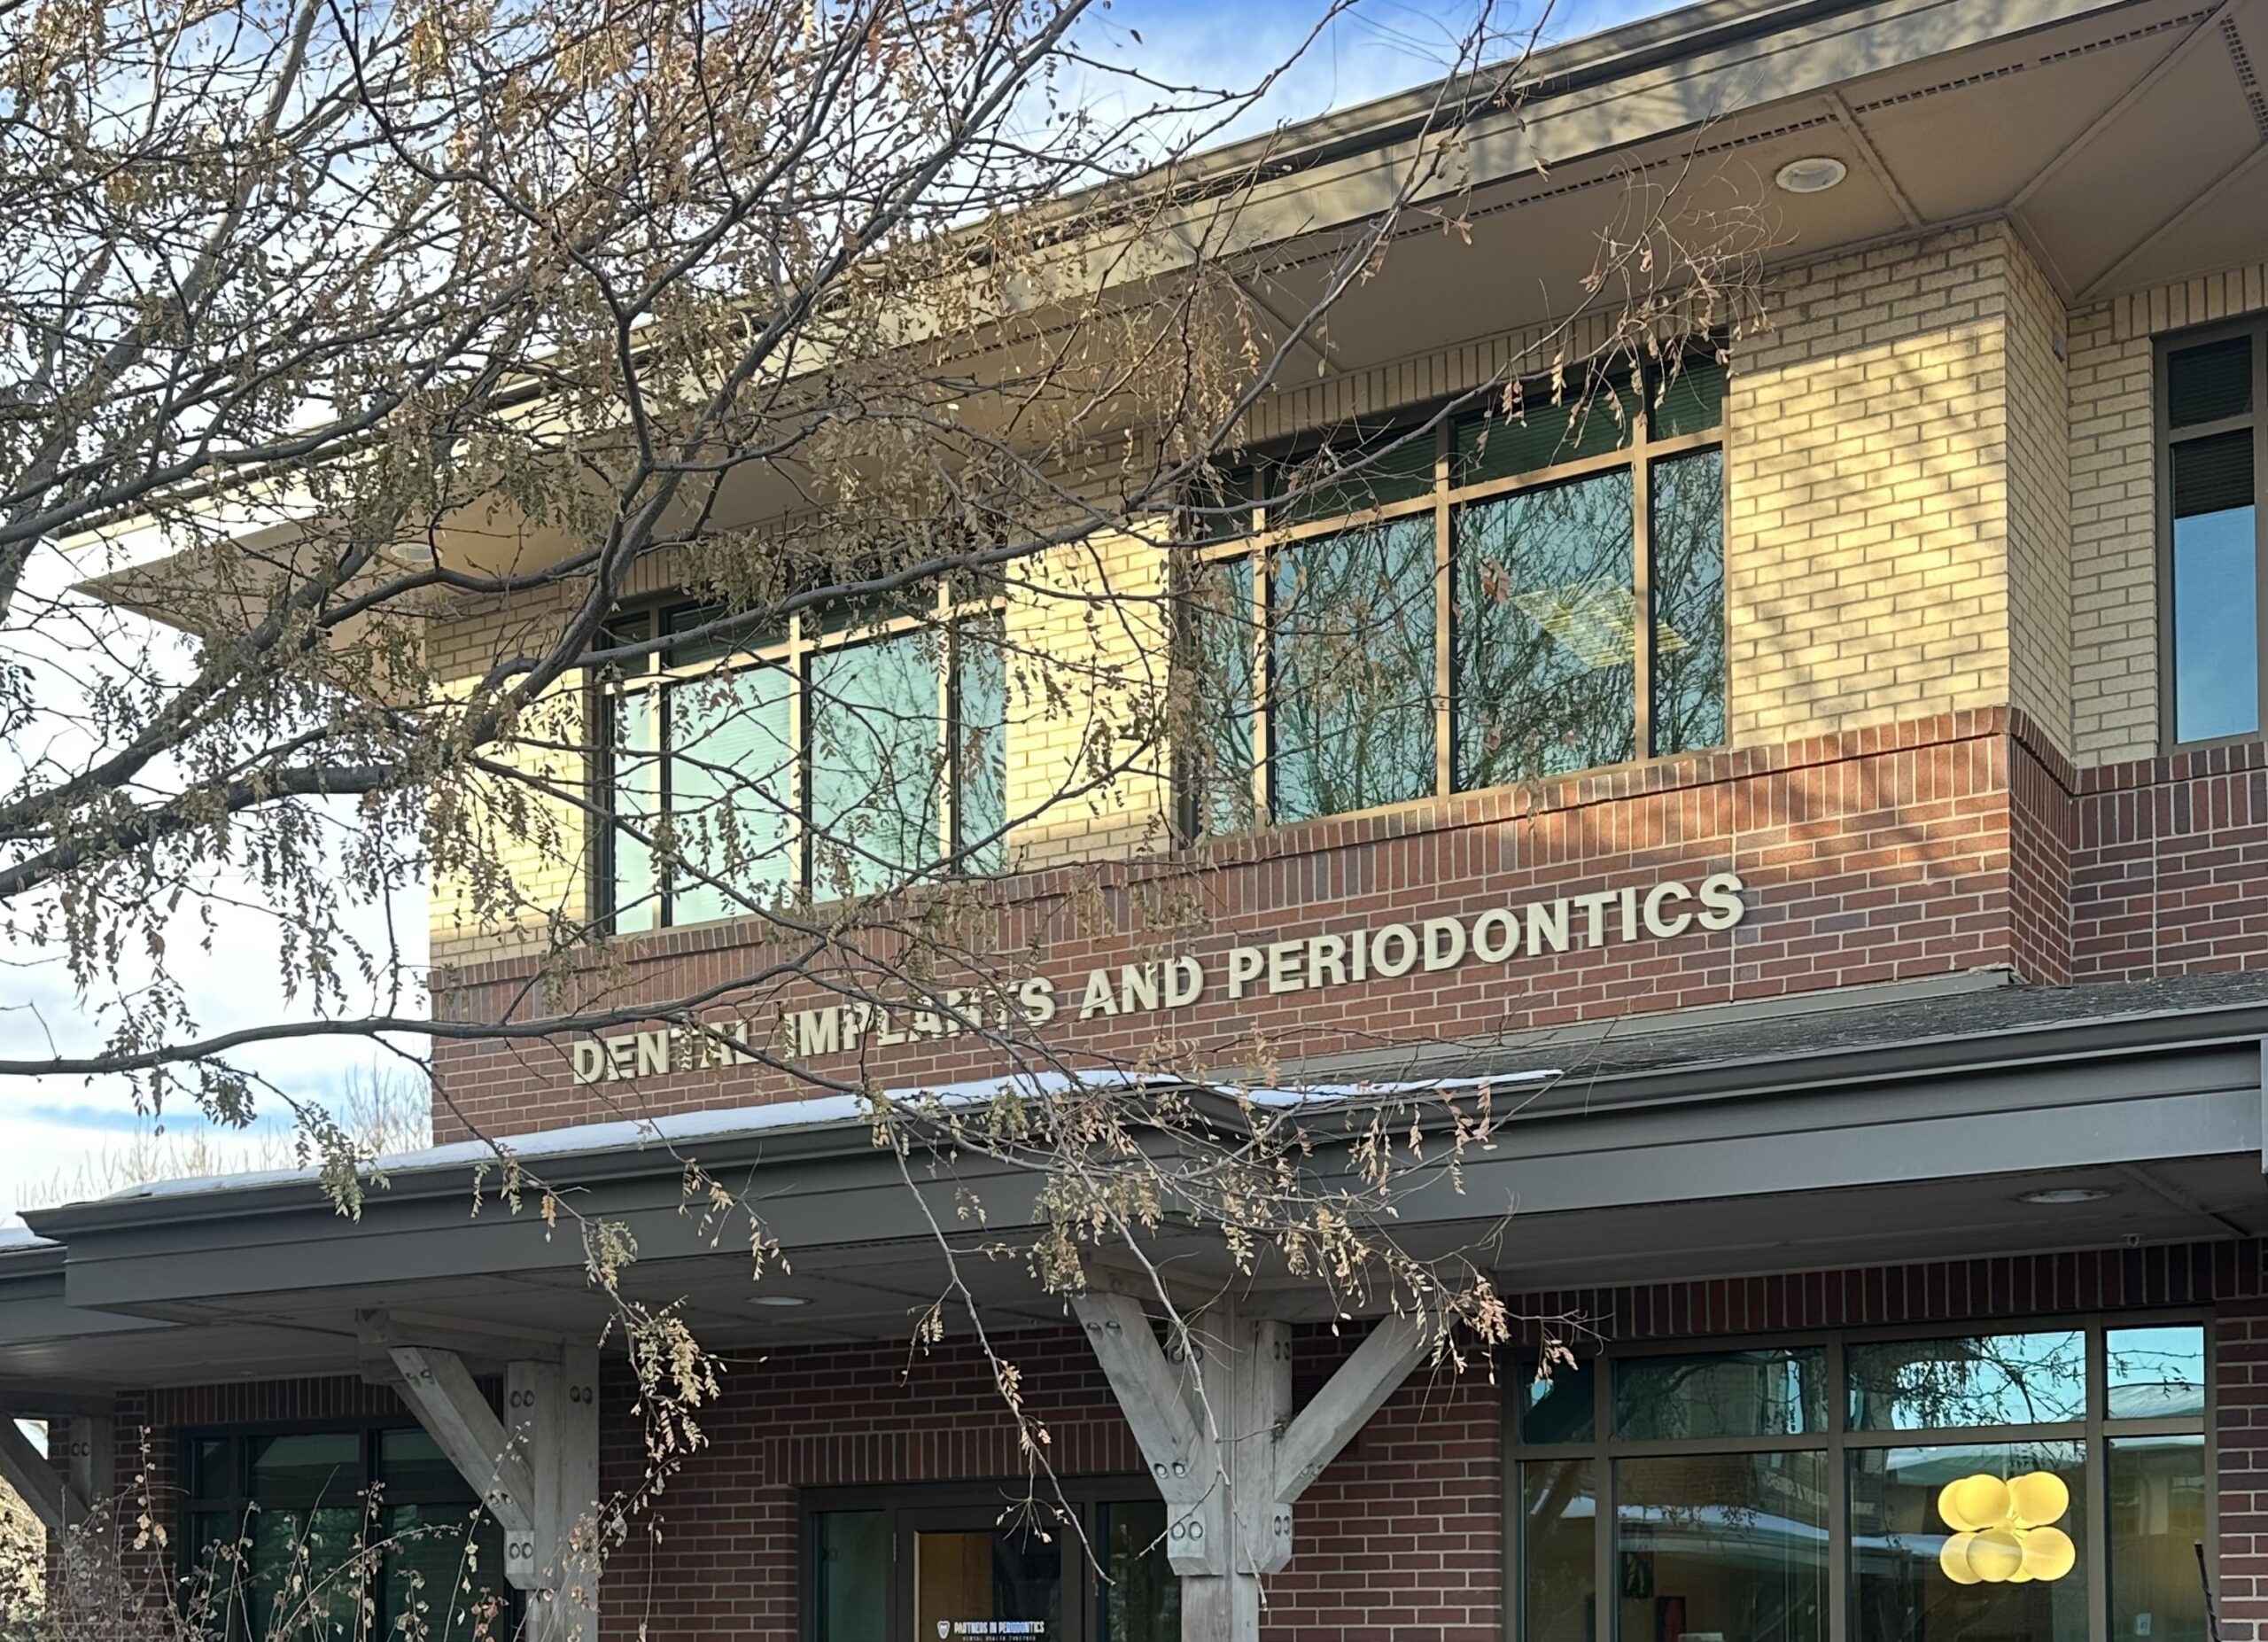 Dr. Chad Riggs. Partners in Periodontics. Dental Implants, Cosmetic Periodontal Surgery, Gum Grafting, Periodontal Therapy, Teeth in a Day, Tooth Extractions. Periodontist in Loveland, CO 80538